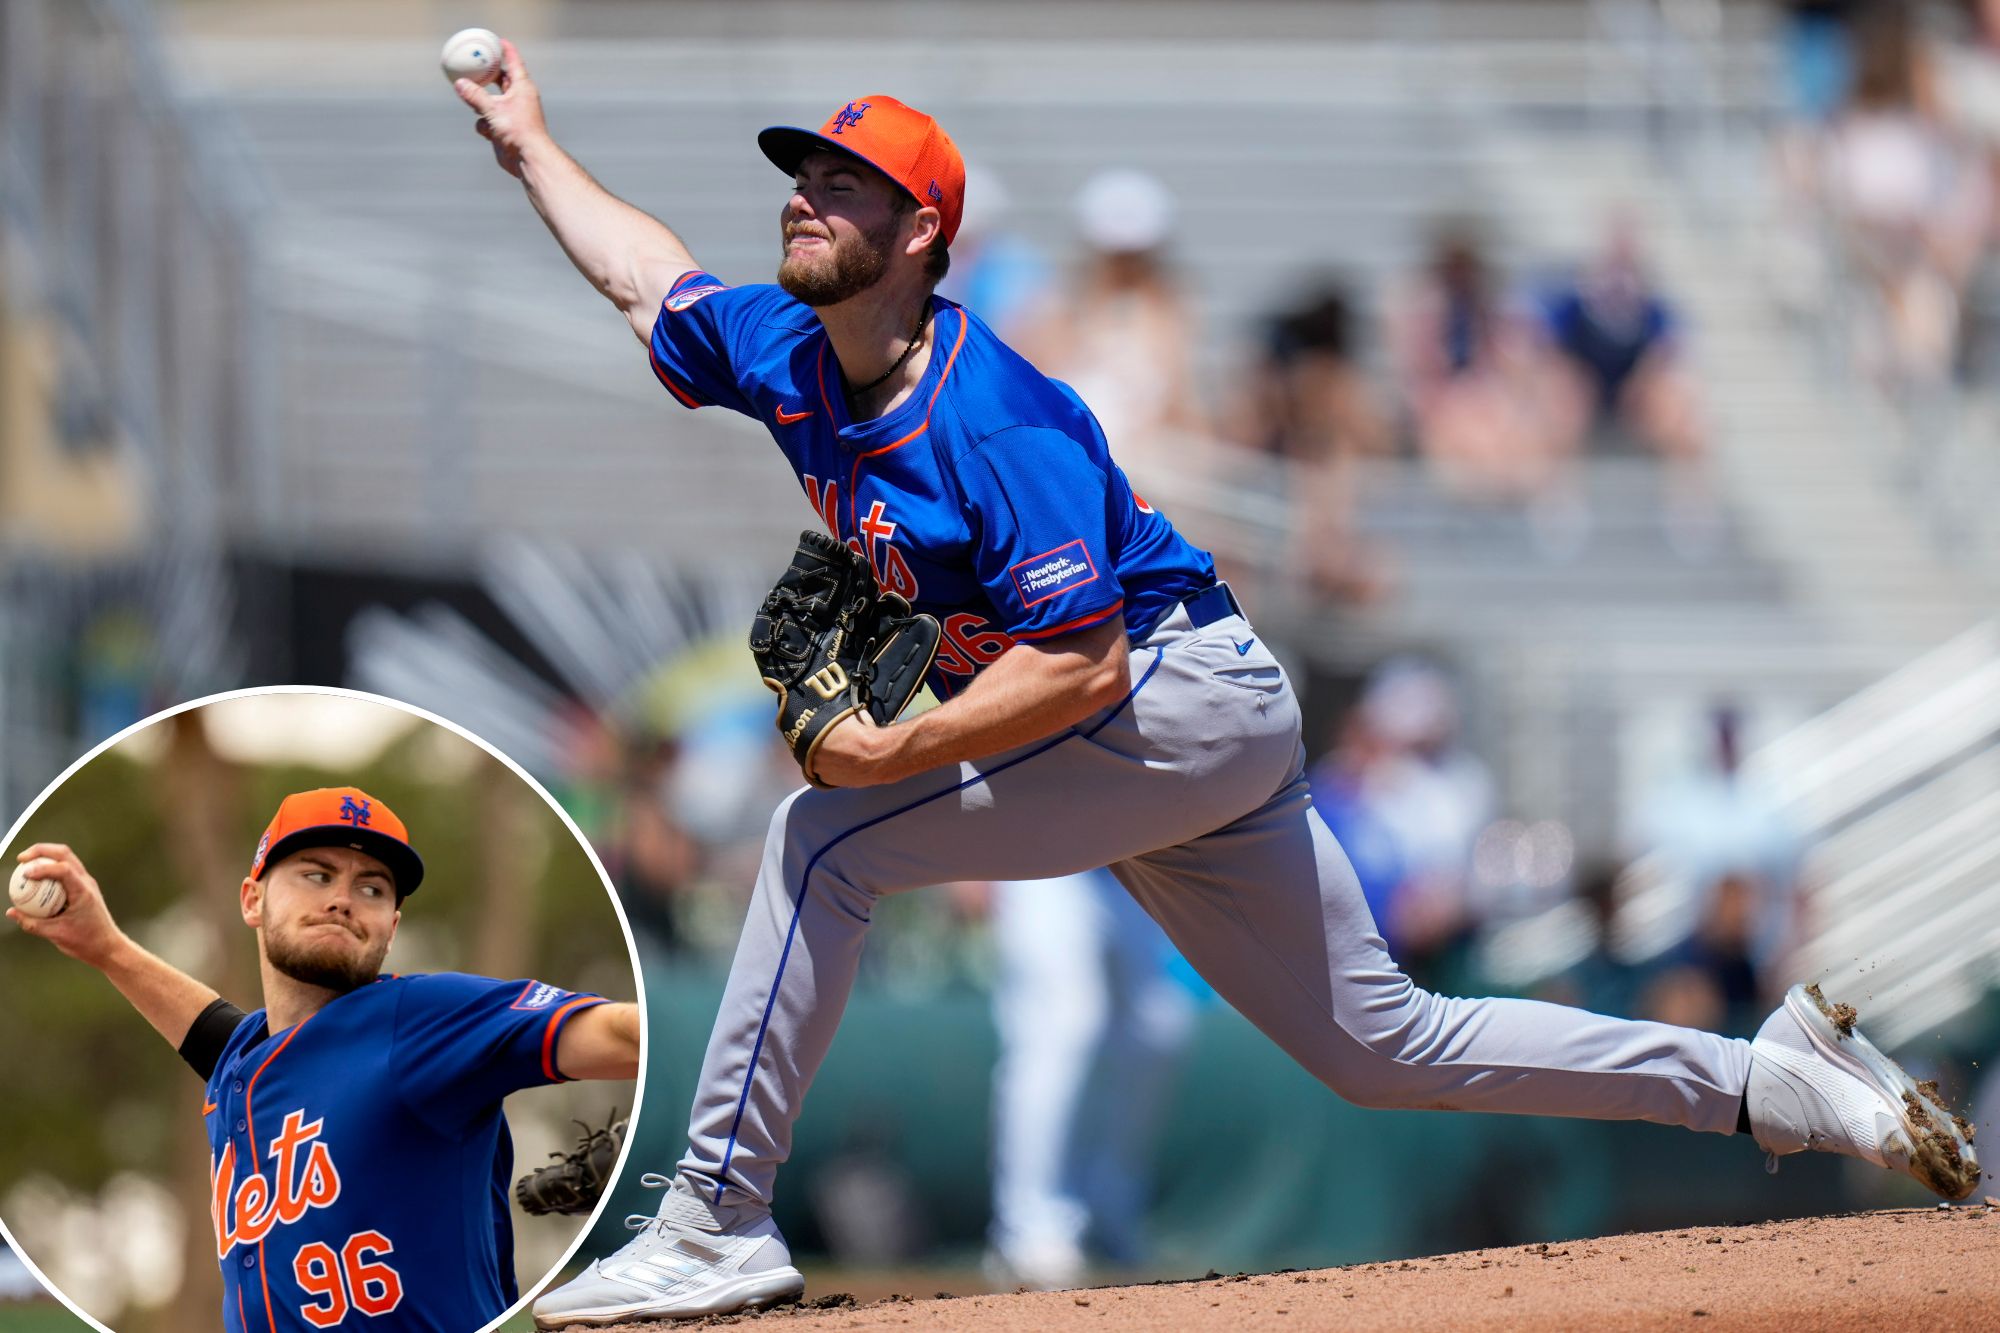 Christian Scott could end up pitching for the Mets in 2024 after an impressive spring training and strong start with Triple-A Syracuse.